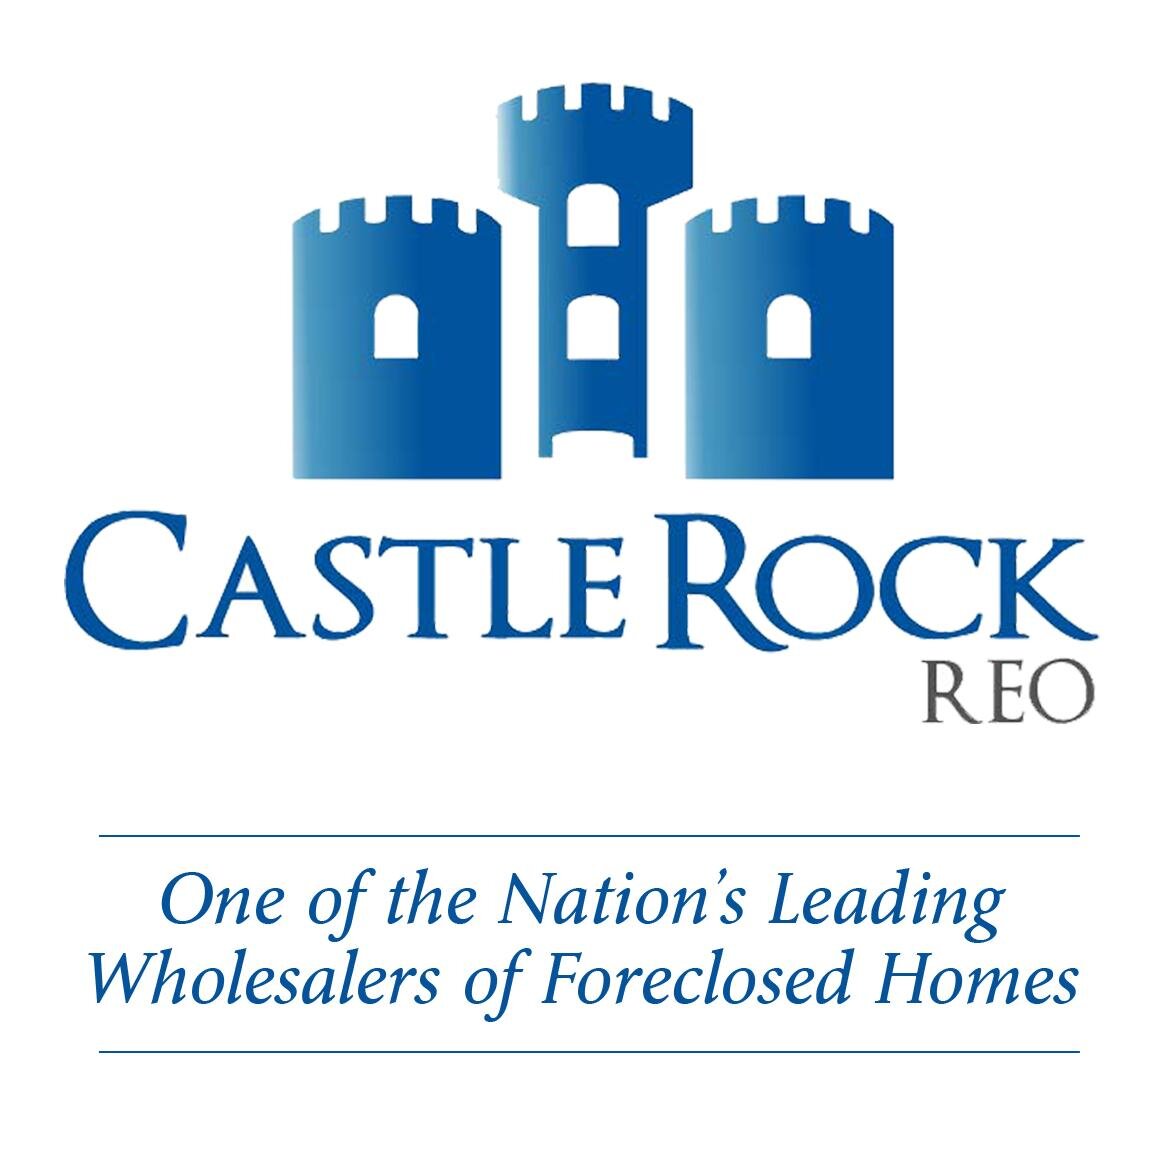 The nation's leading wholesalers of foreclosed real estate. With properties from $2k to $100k+, owning a home for less has never been easier.